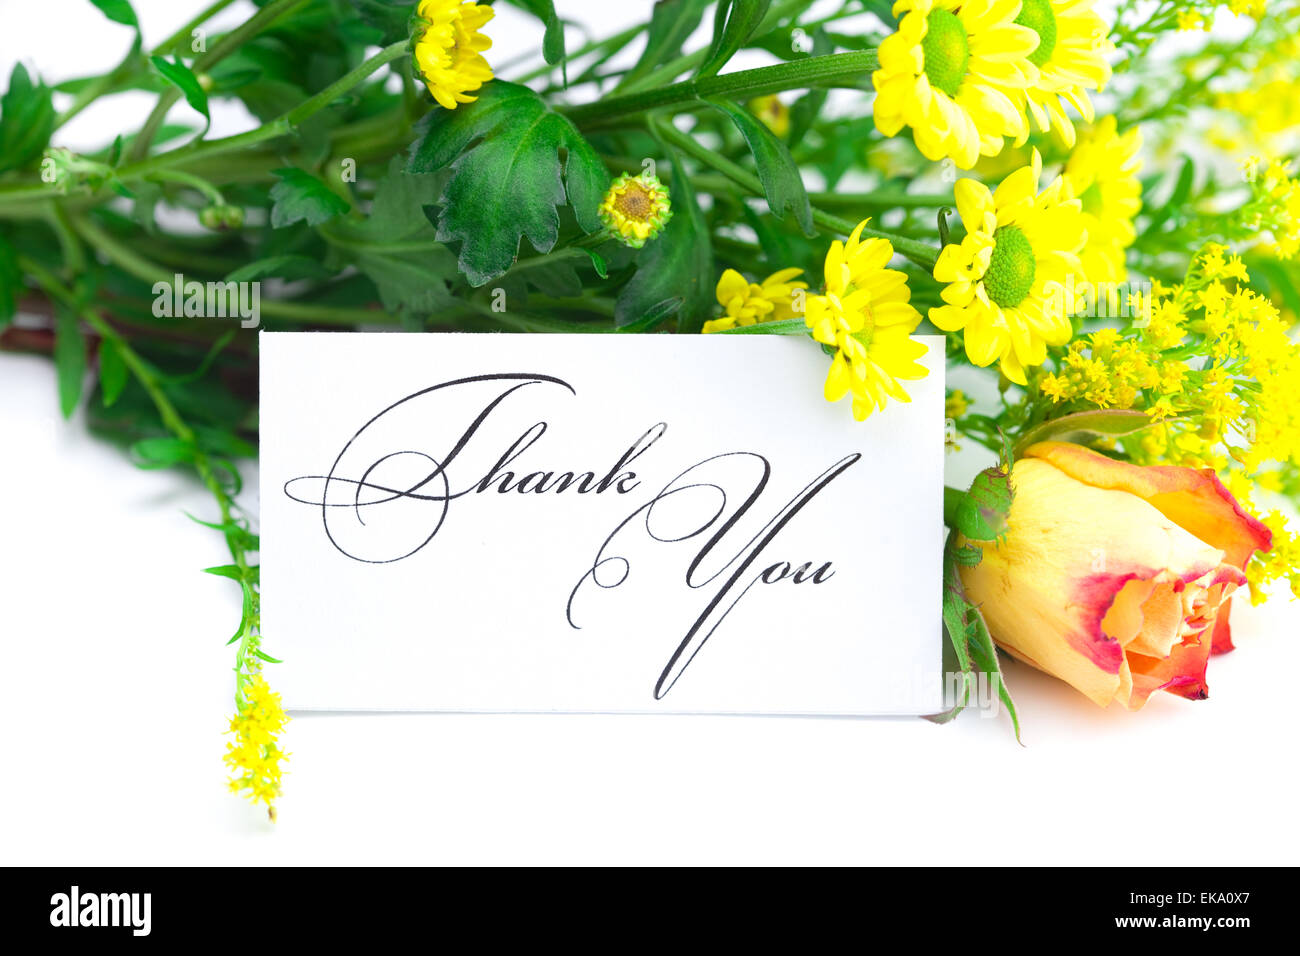 yellow red rose ,yellow field  flower and a card  with the words Stock Photo